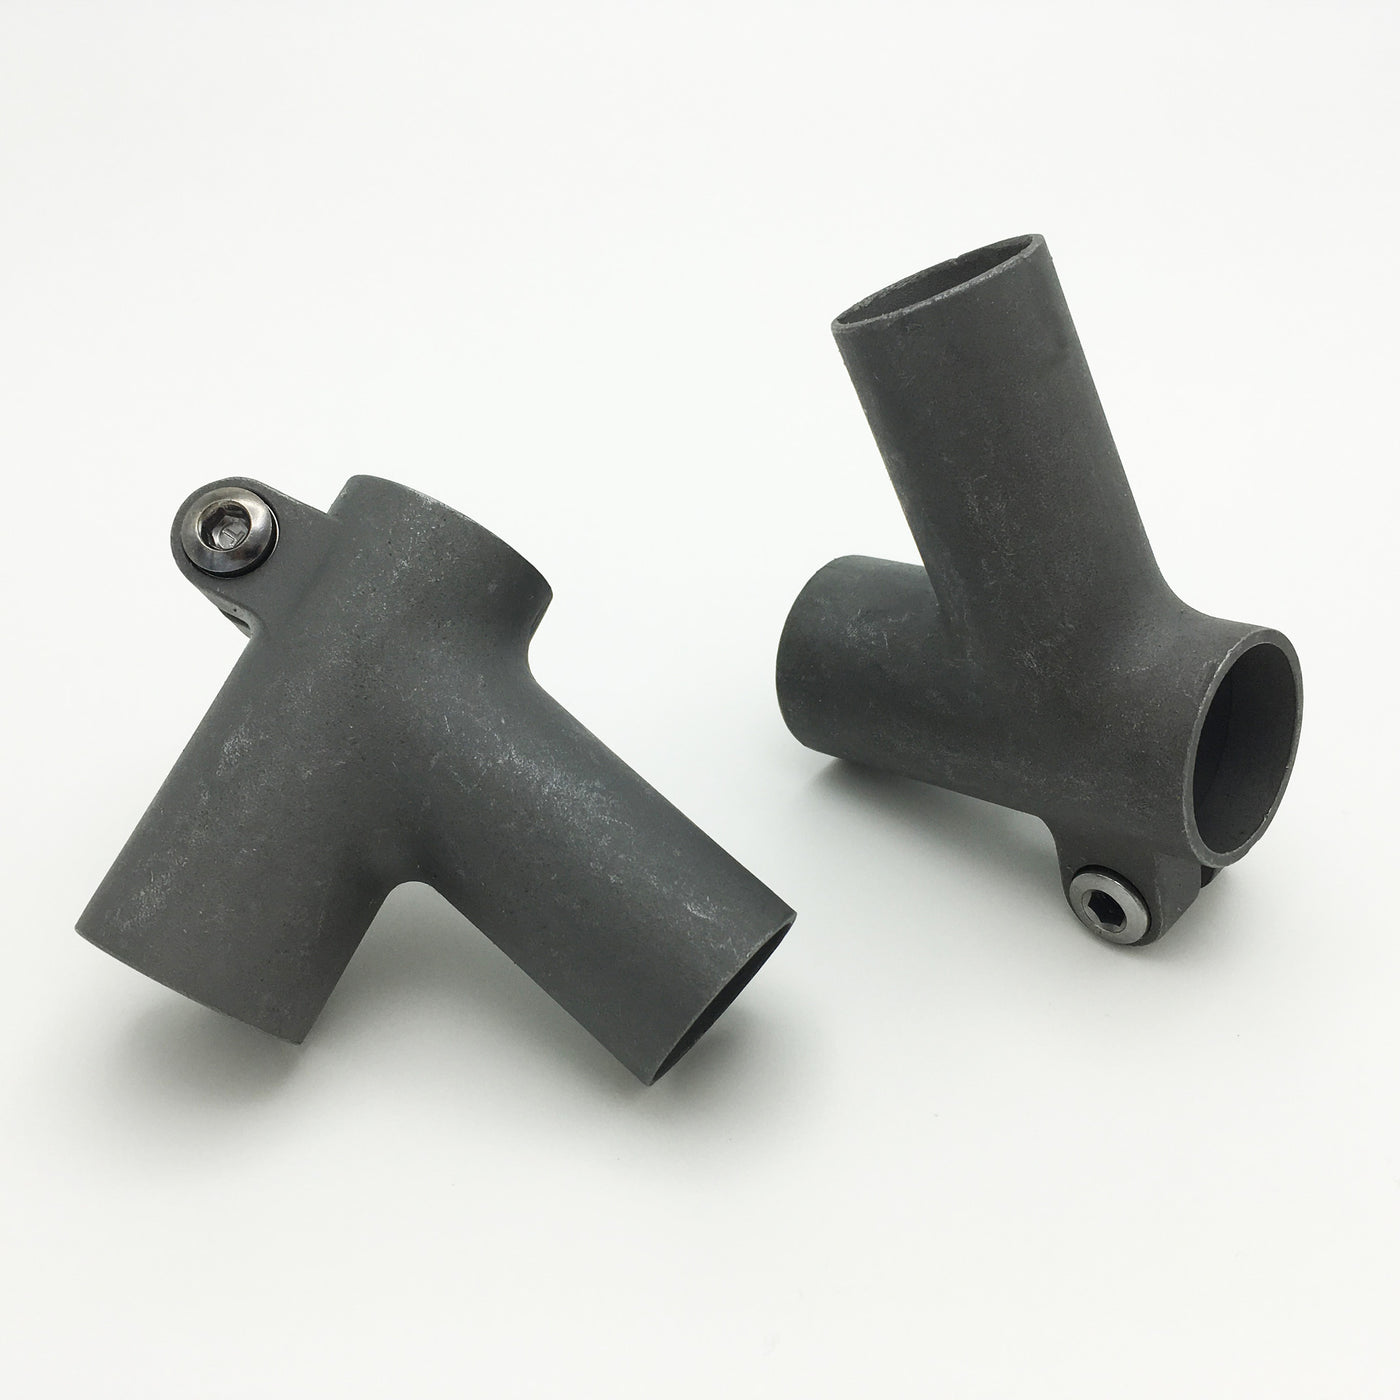 Seat lug for standard 1" frame - blank for carving - 28.6 seat tube & 25.4 top tube - 75°